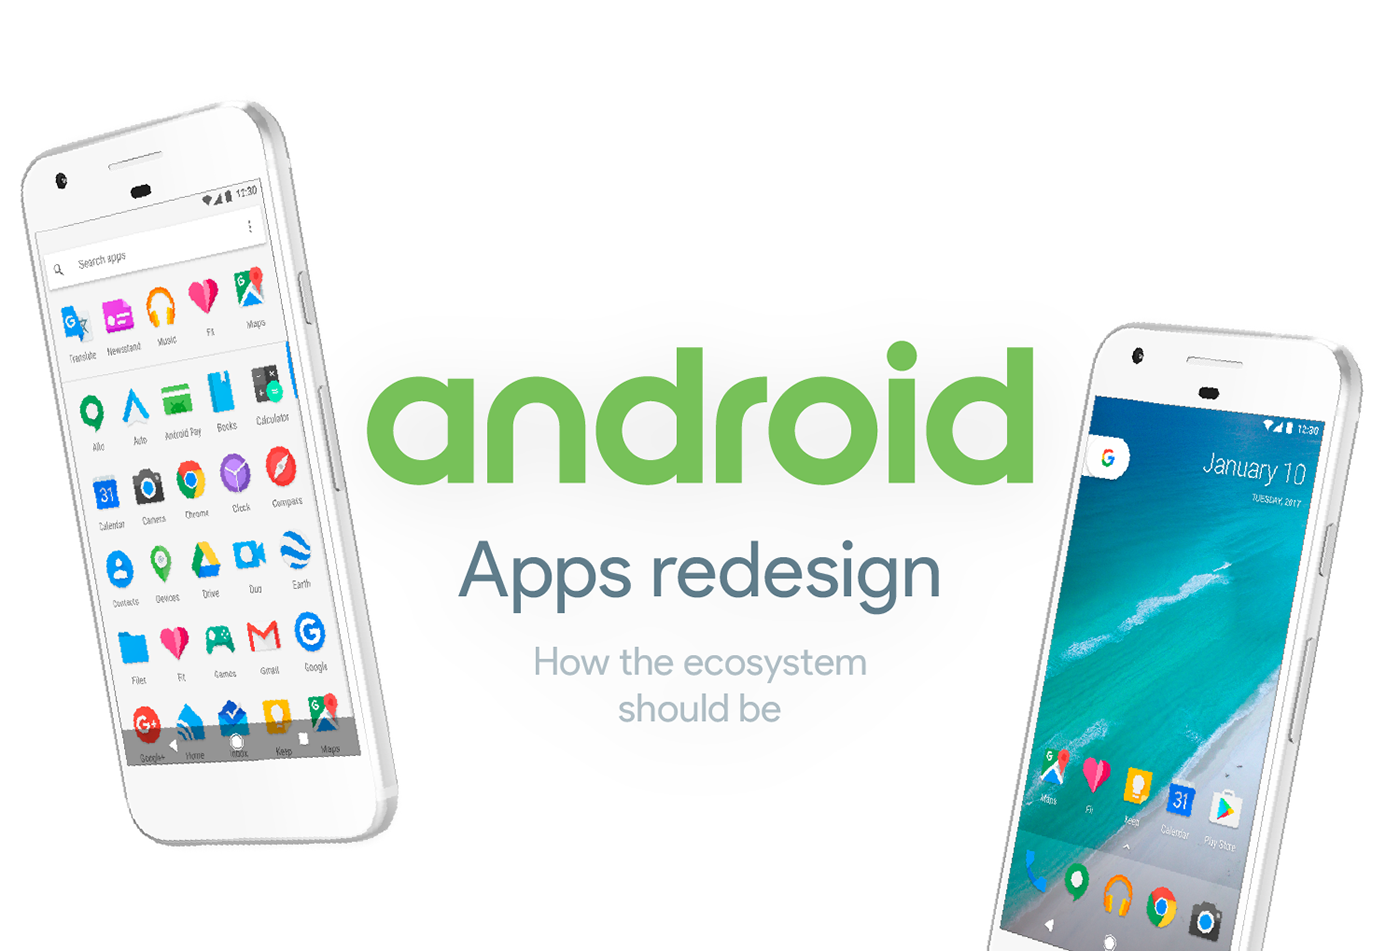 google android redesign concept apps material product Icon UI ux